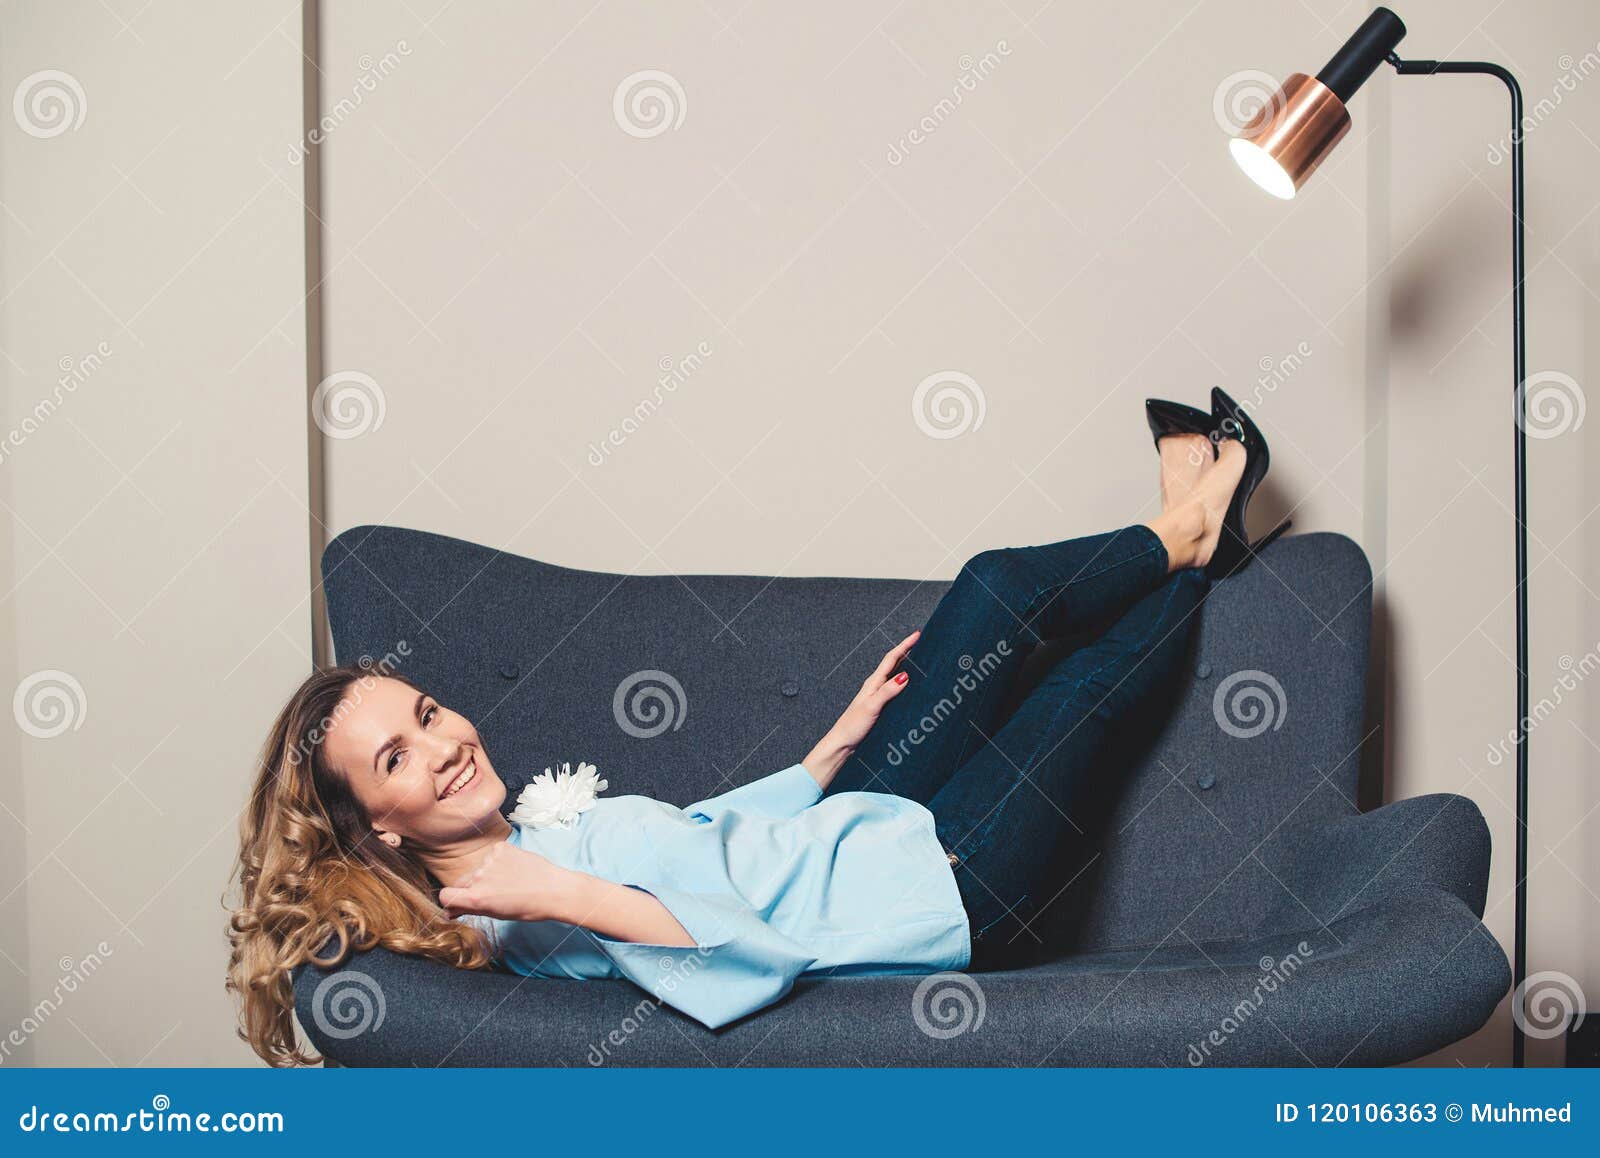 Elegant Woman Resting On The Couch In Stylish Shoes High Heels Young